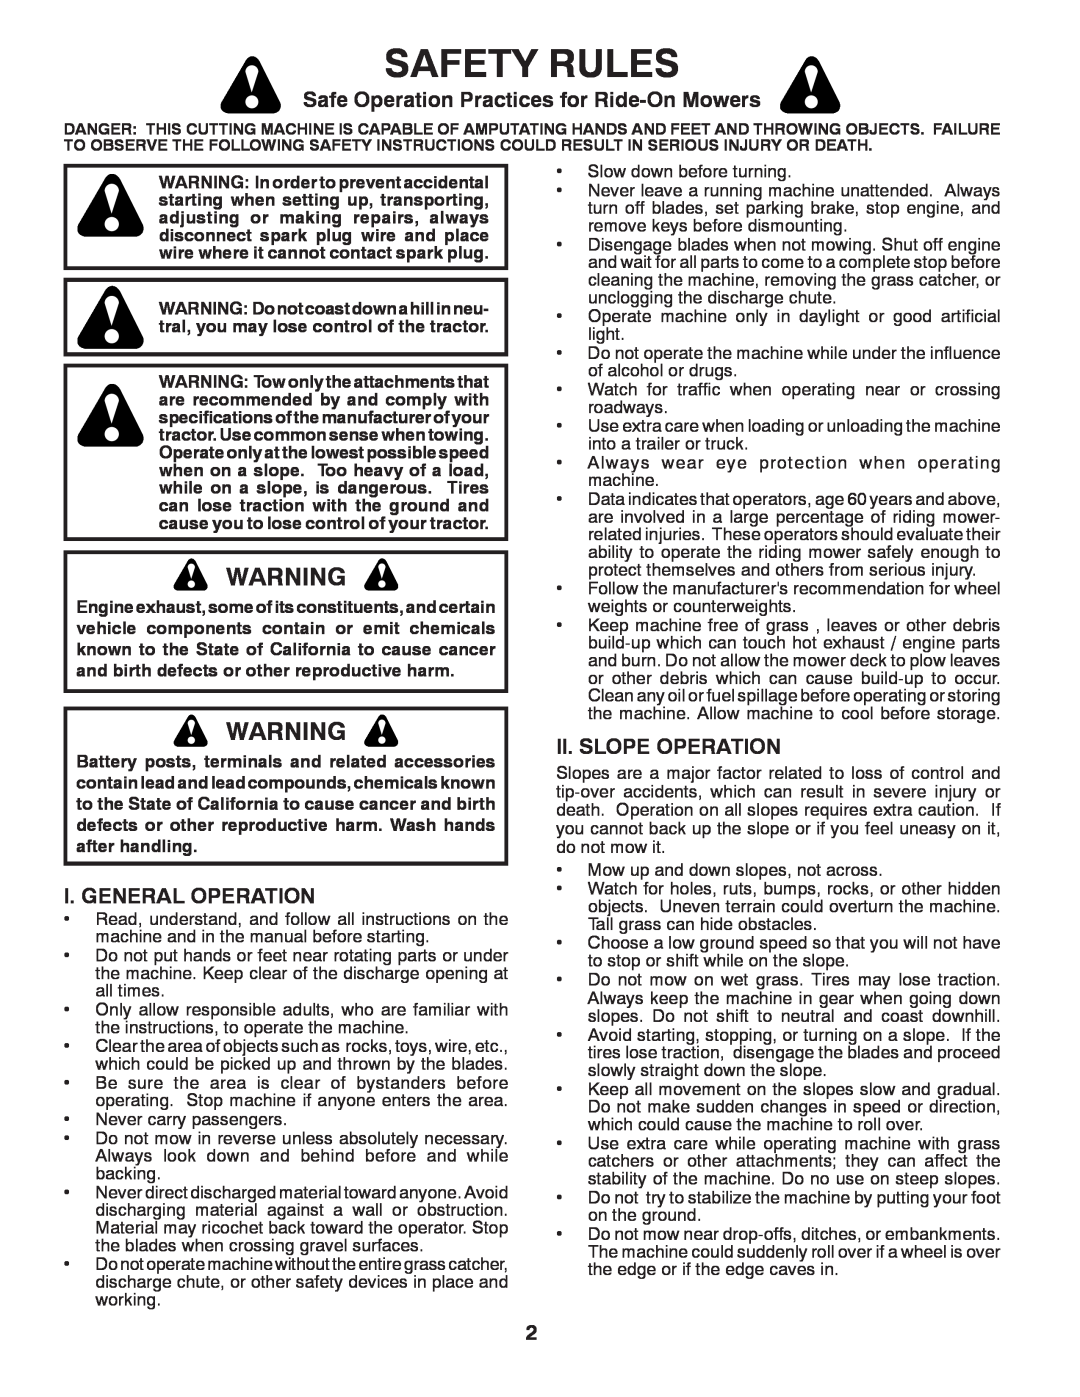 Husqvarna YTH2242 Safety Rules, Safe Operation Practices for Ride-On Mowers, I. General Operation, Ii. Slope Operation 